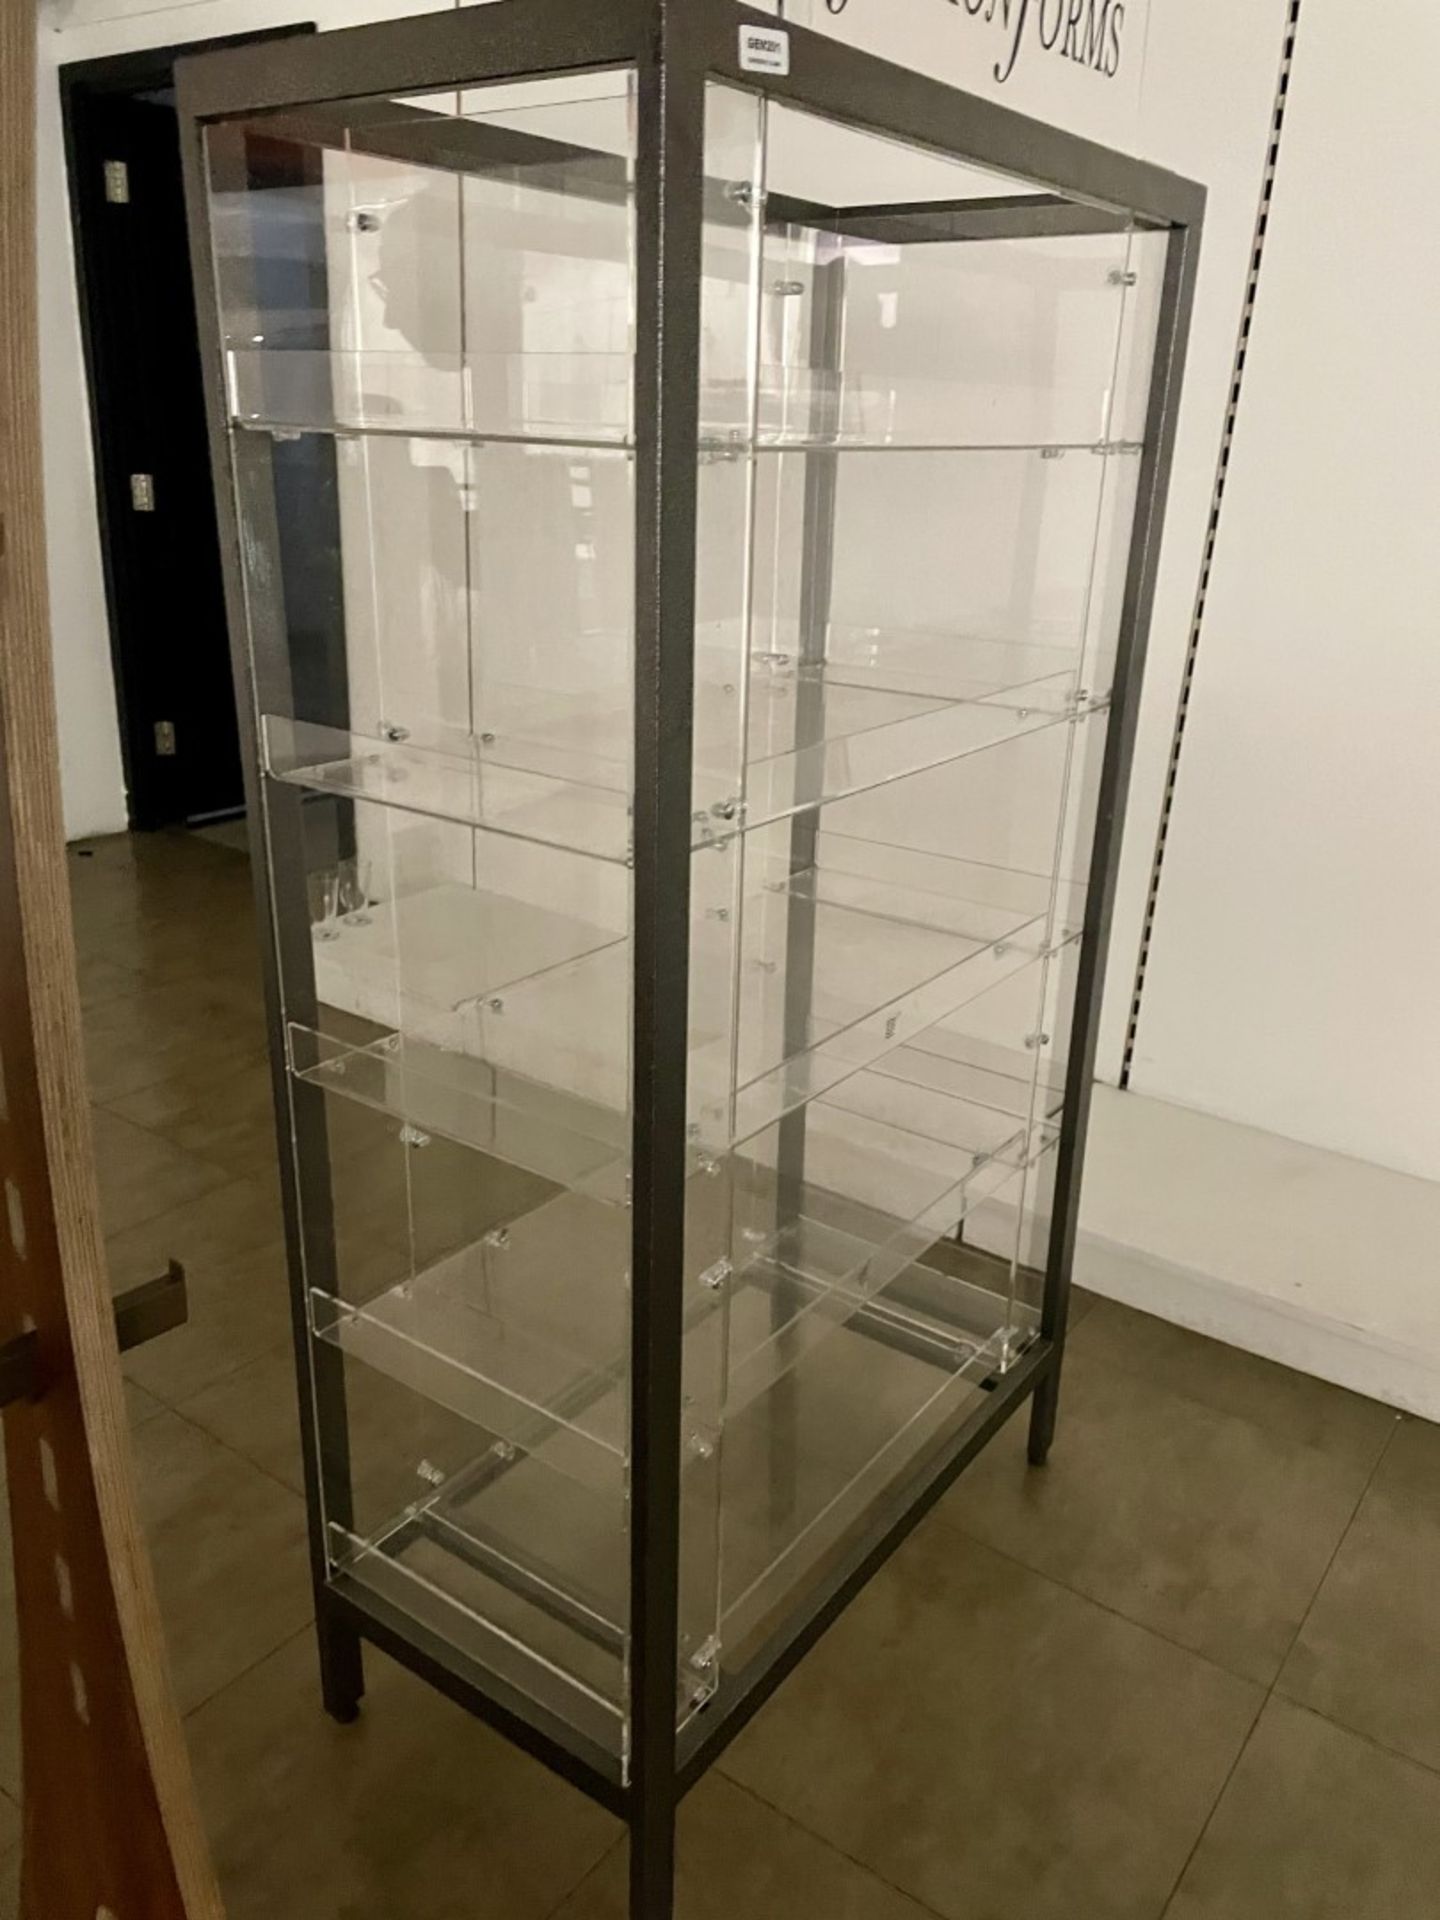 1 x Fashion Forms Display Shelf Unit With One Piece Metal Frame and Acrylic Shelves -Size H154 x W87 - Image 6 of 6